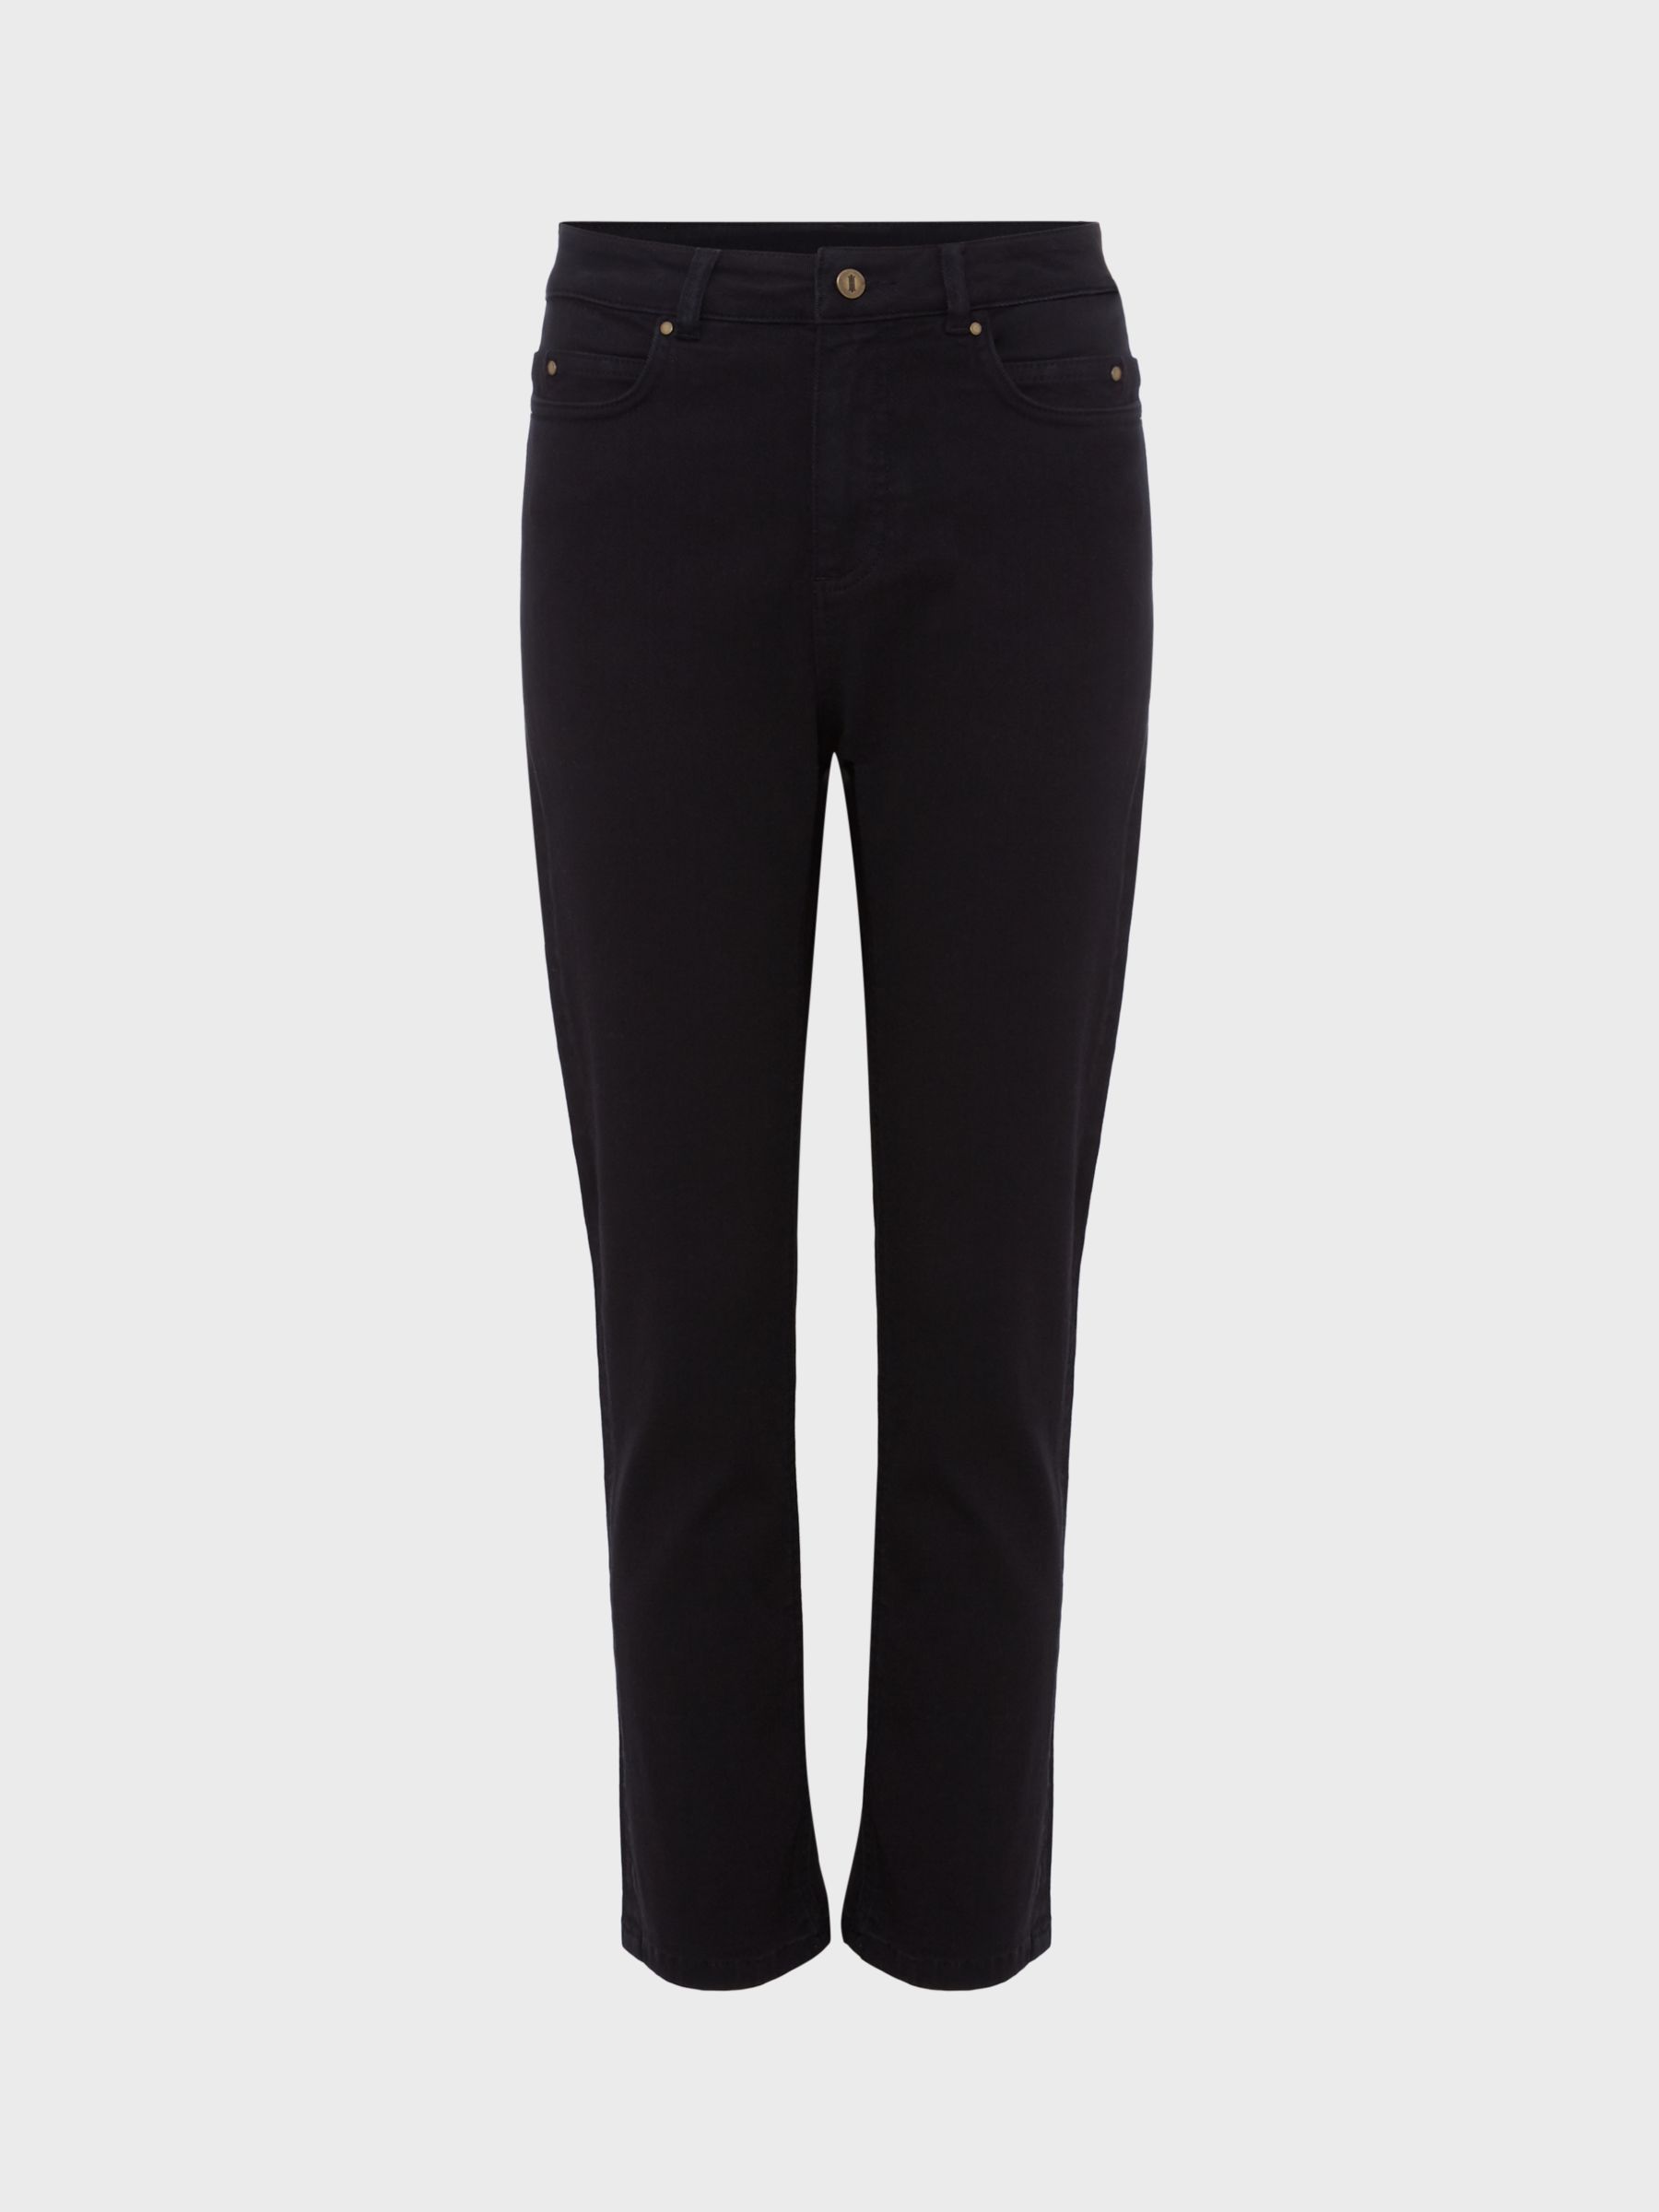 Hobbs Iva Straight Cut Cropped Jeans, Black, 8